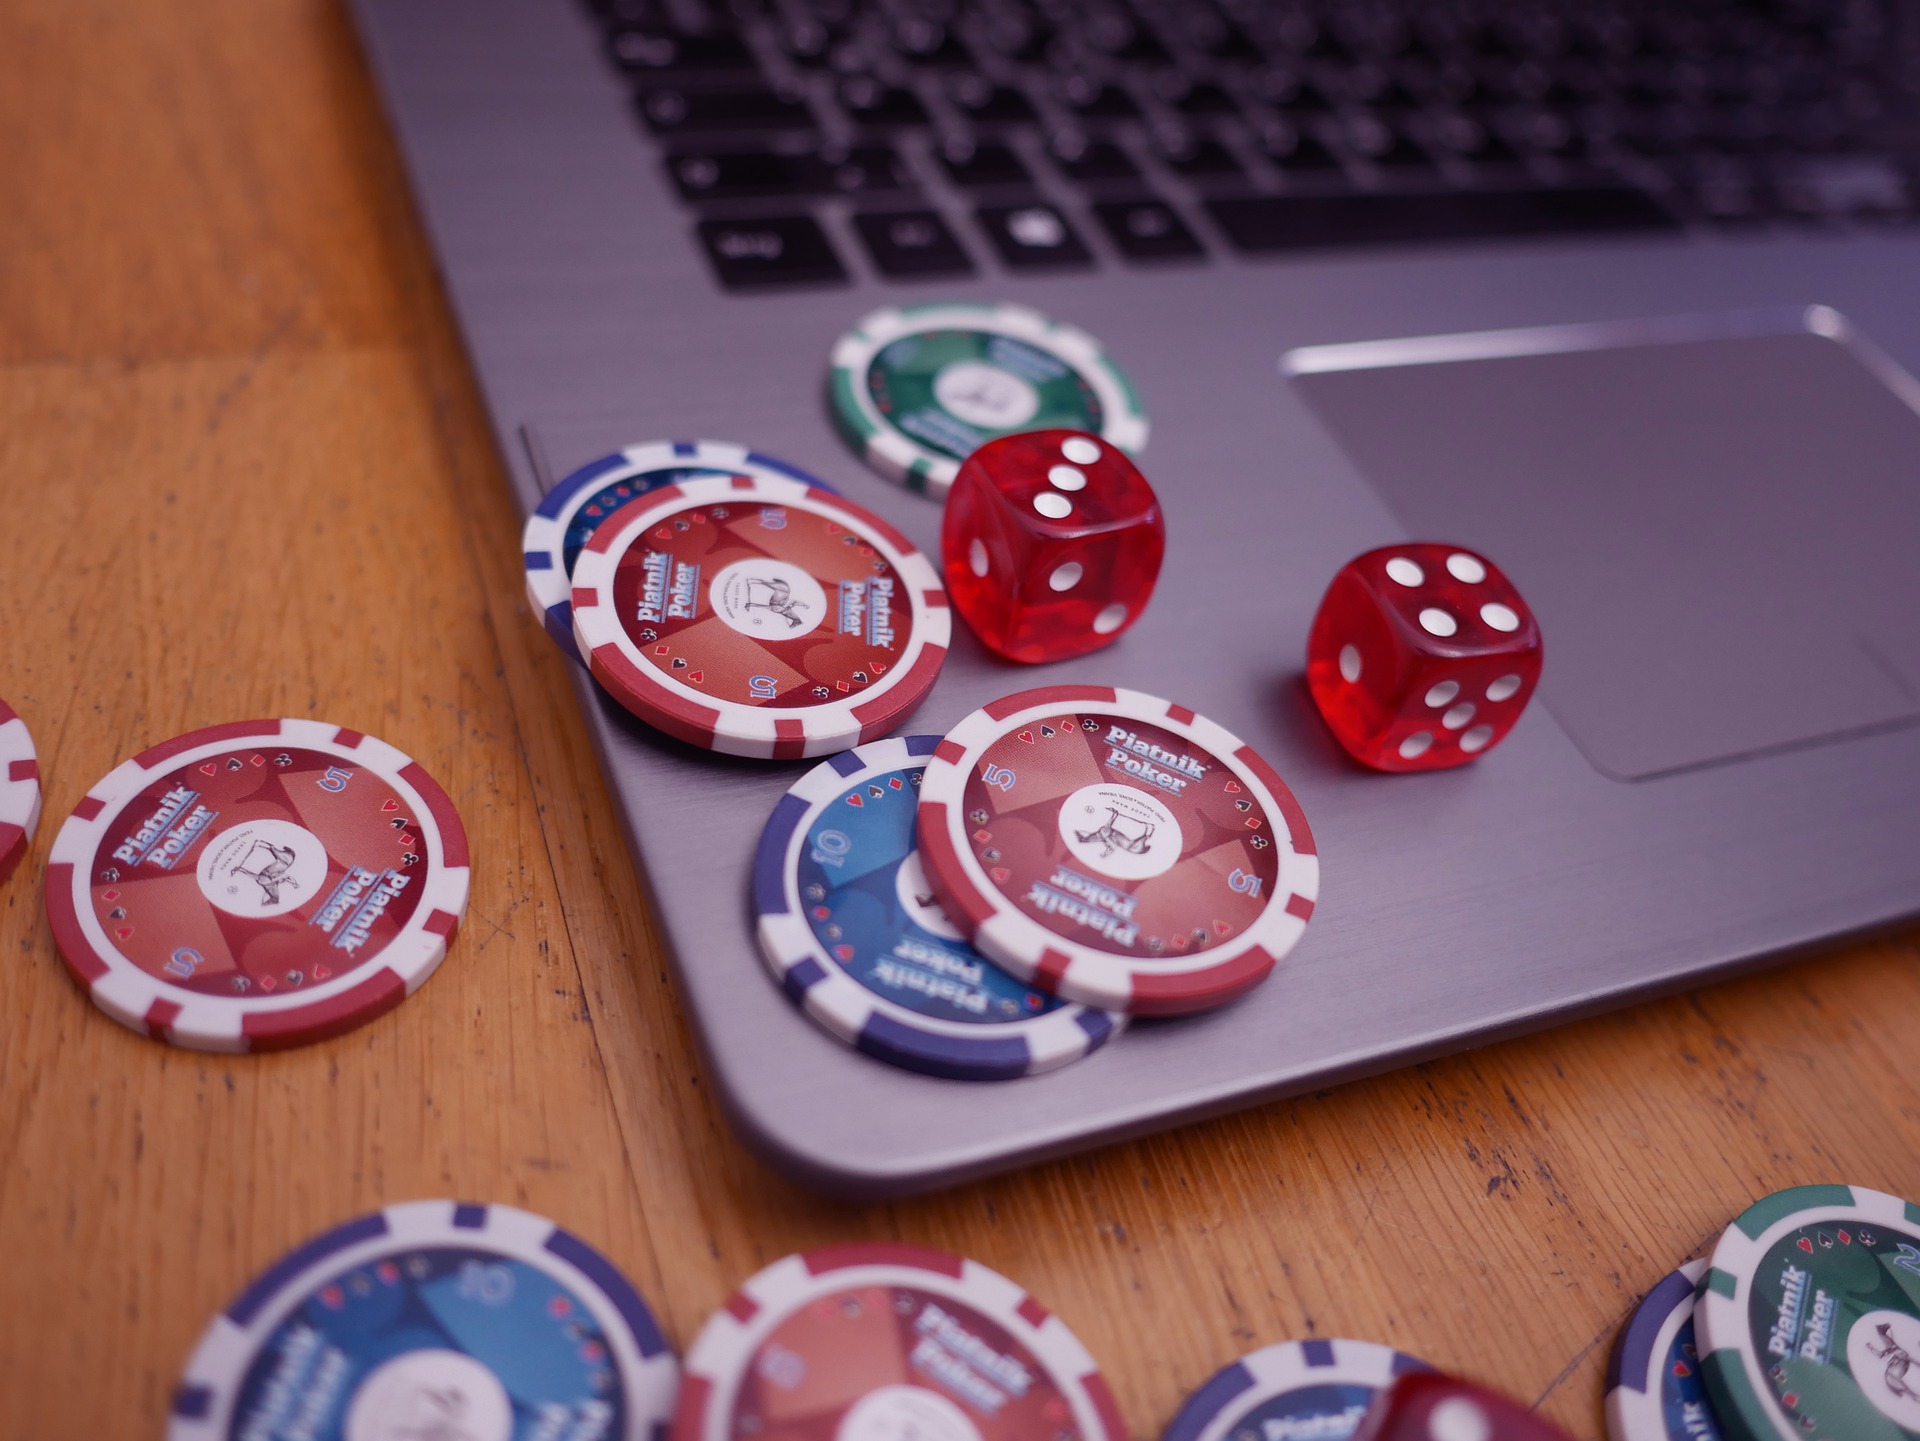 Situs Judi online- play casino poker by following legal rules